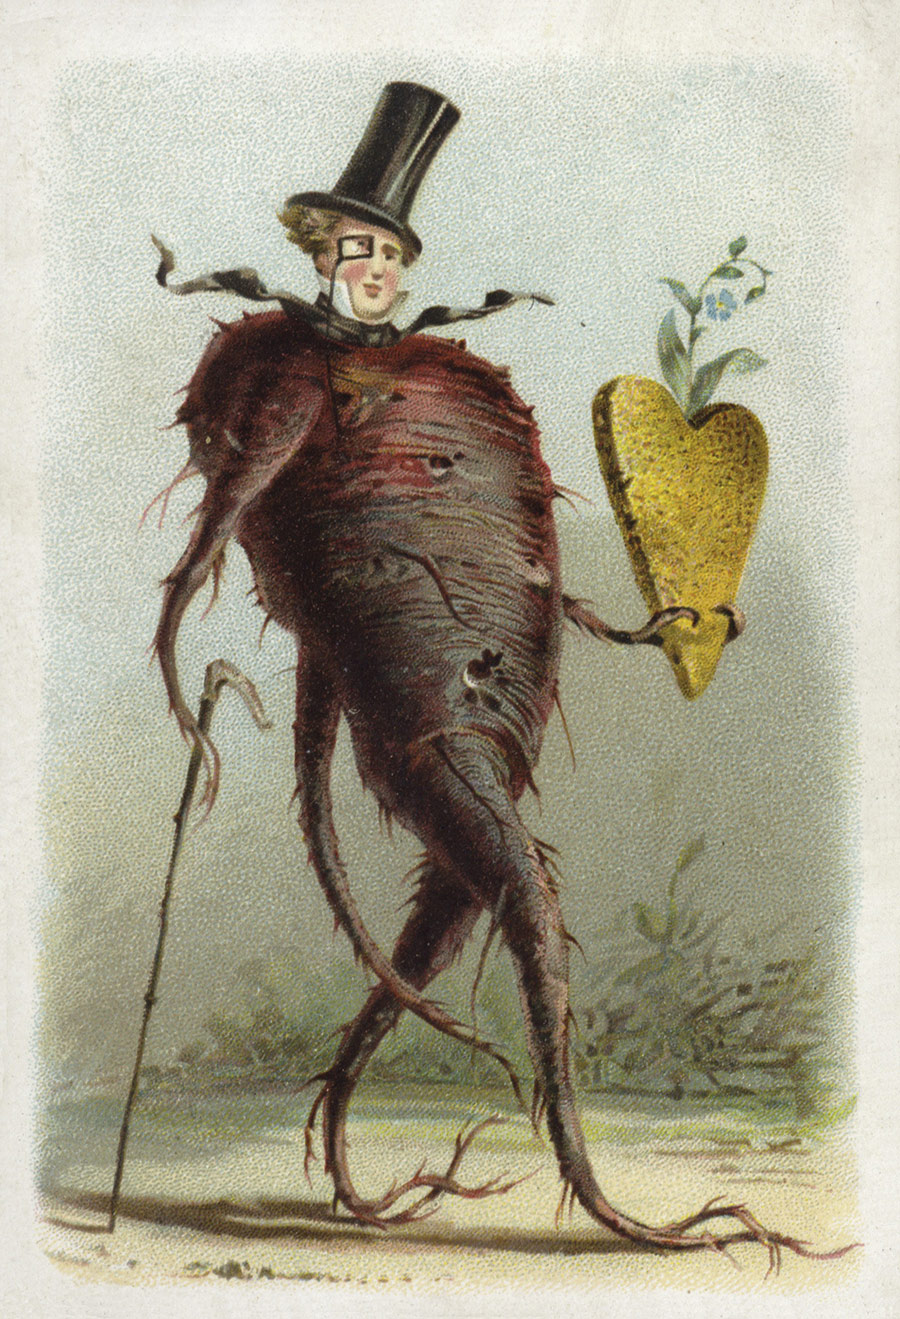 ‘Beetroot’, as depicted in a 19th-century French educational card.